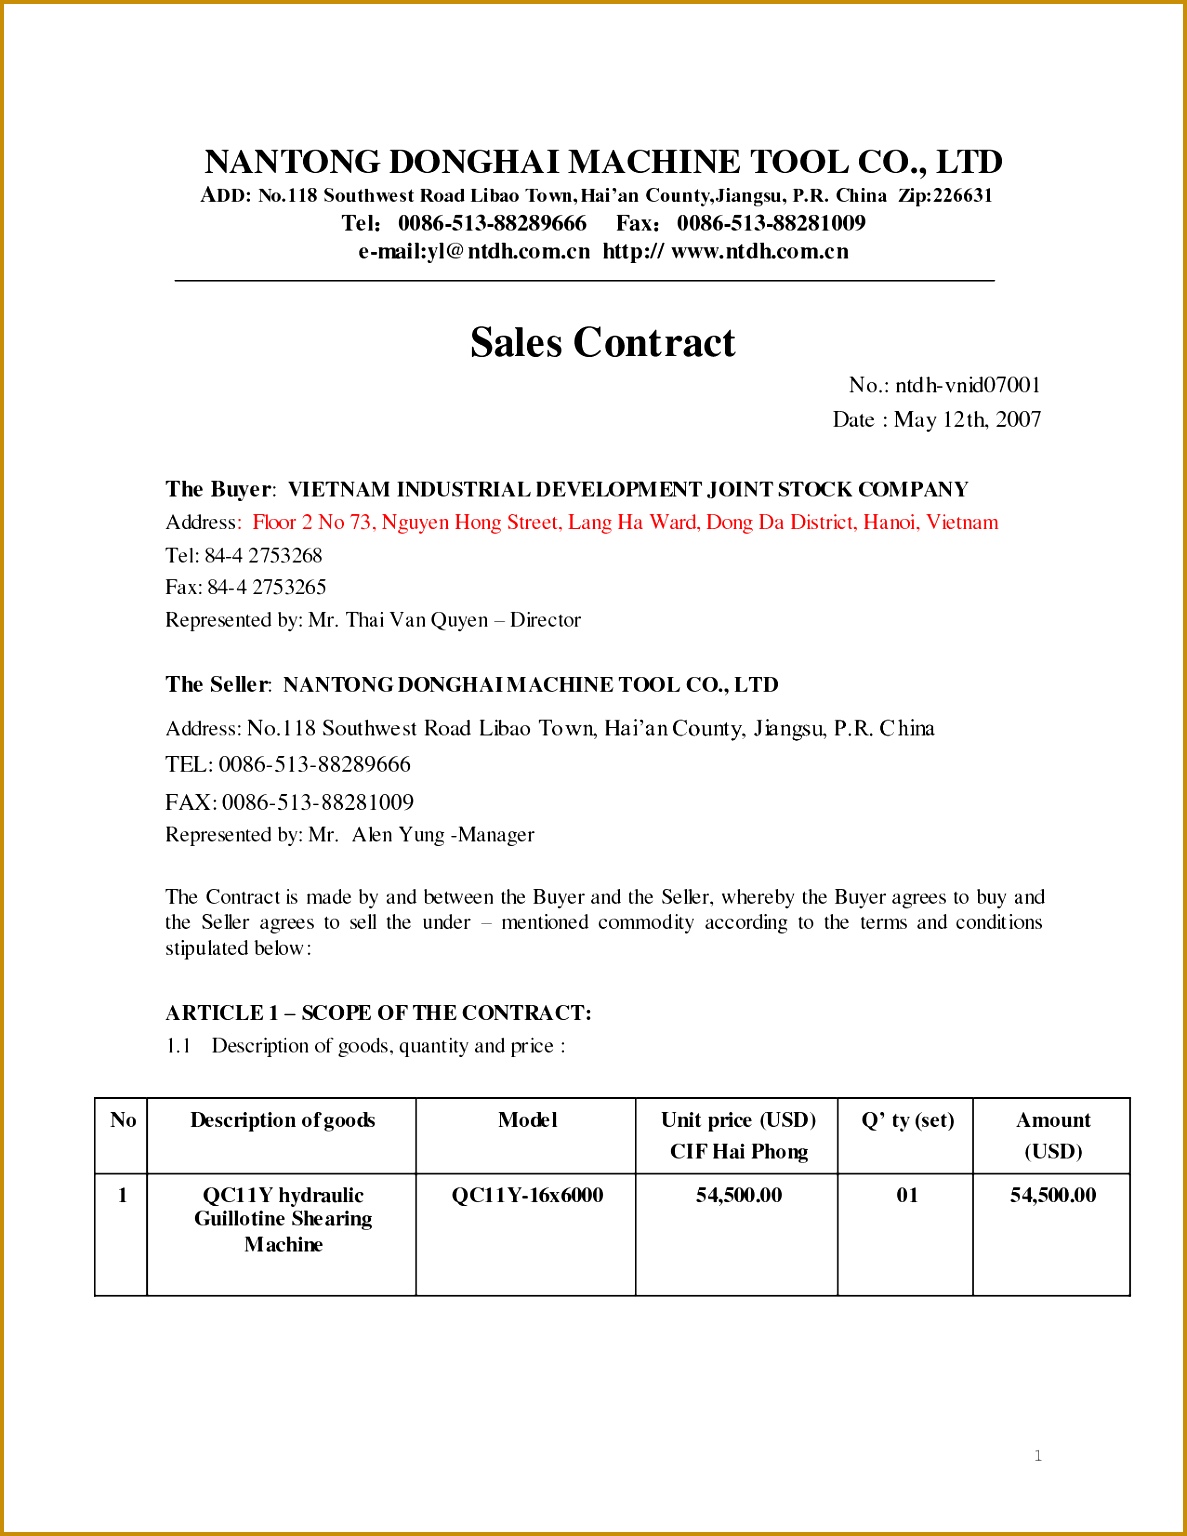 sales contract template 15361187